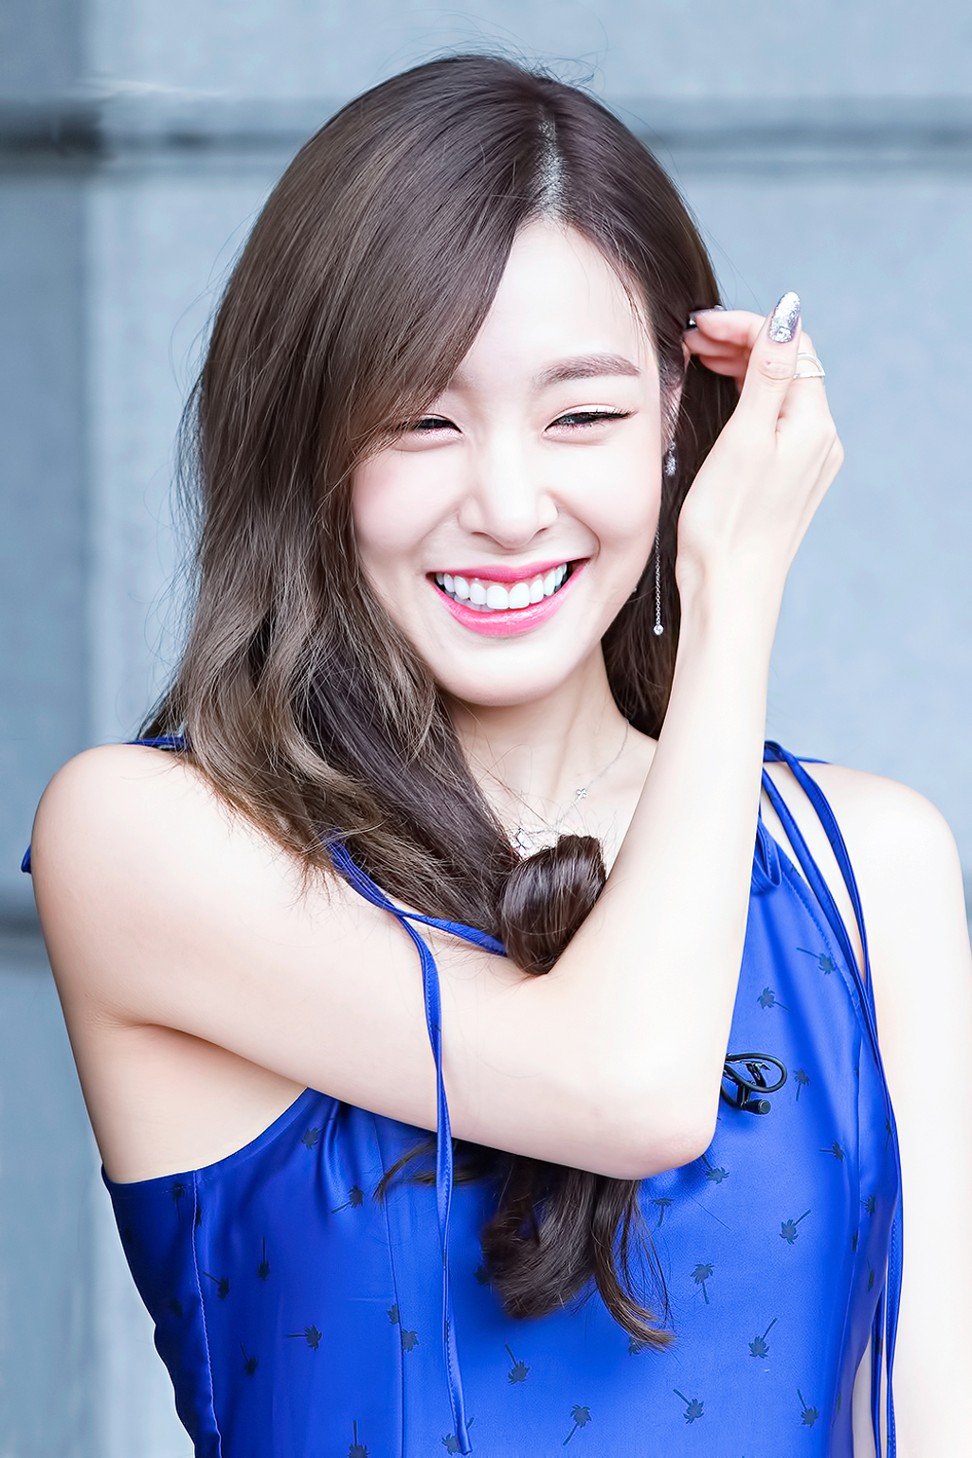 Tiffany joined Paradigm Talent Agency this June.